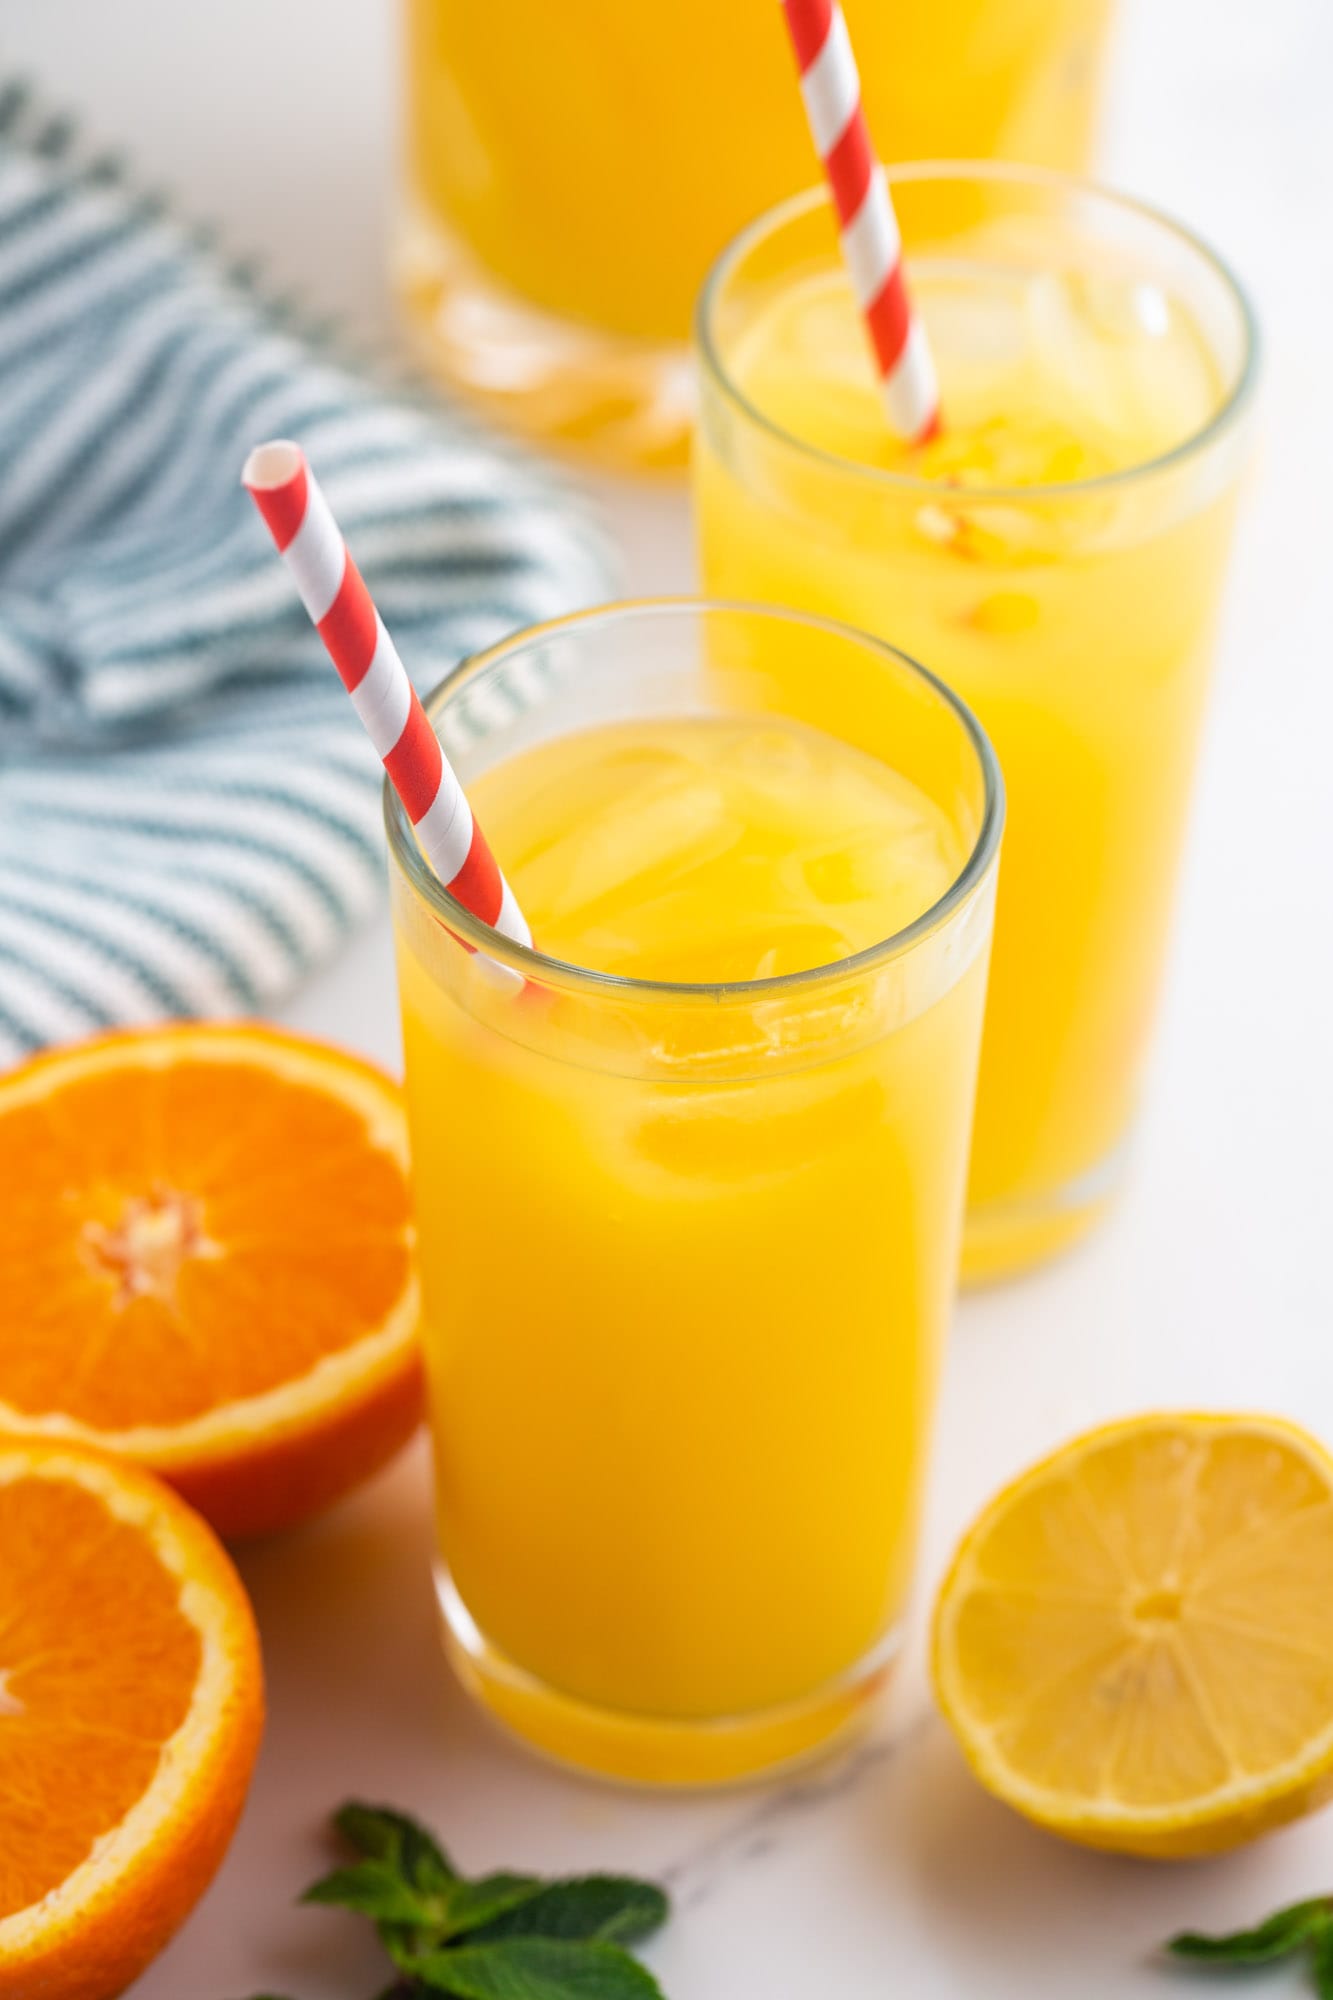 2 glasses of orangeade with straws, and sliced orange and lemon on the sides